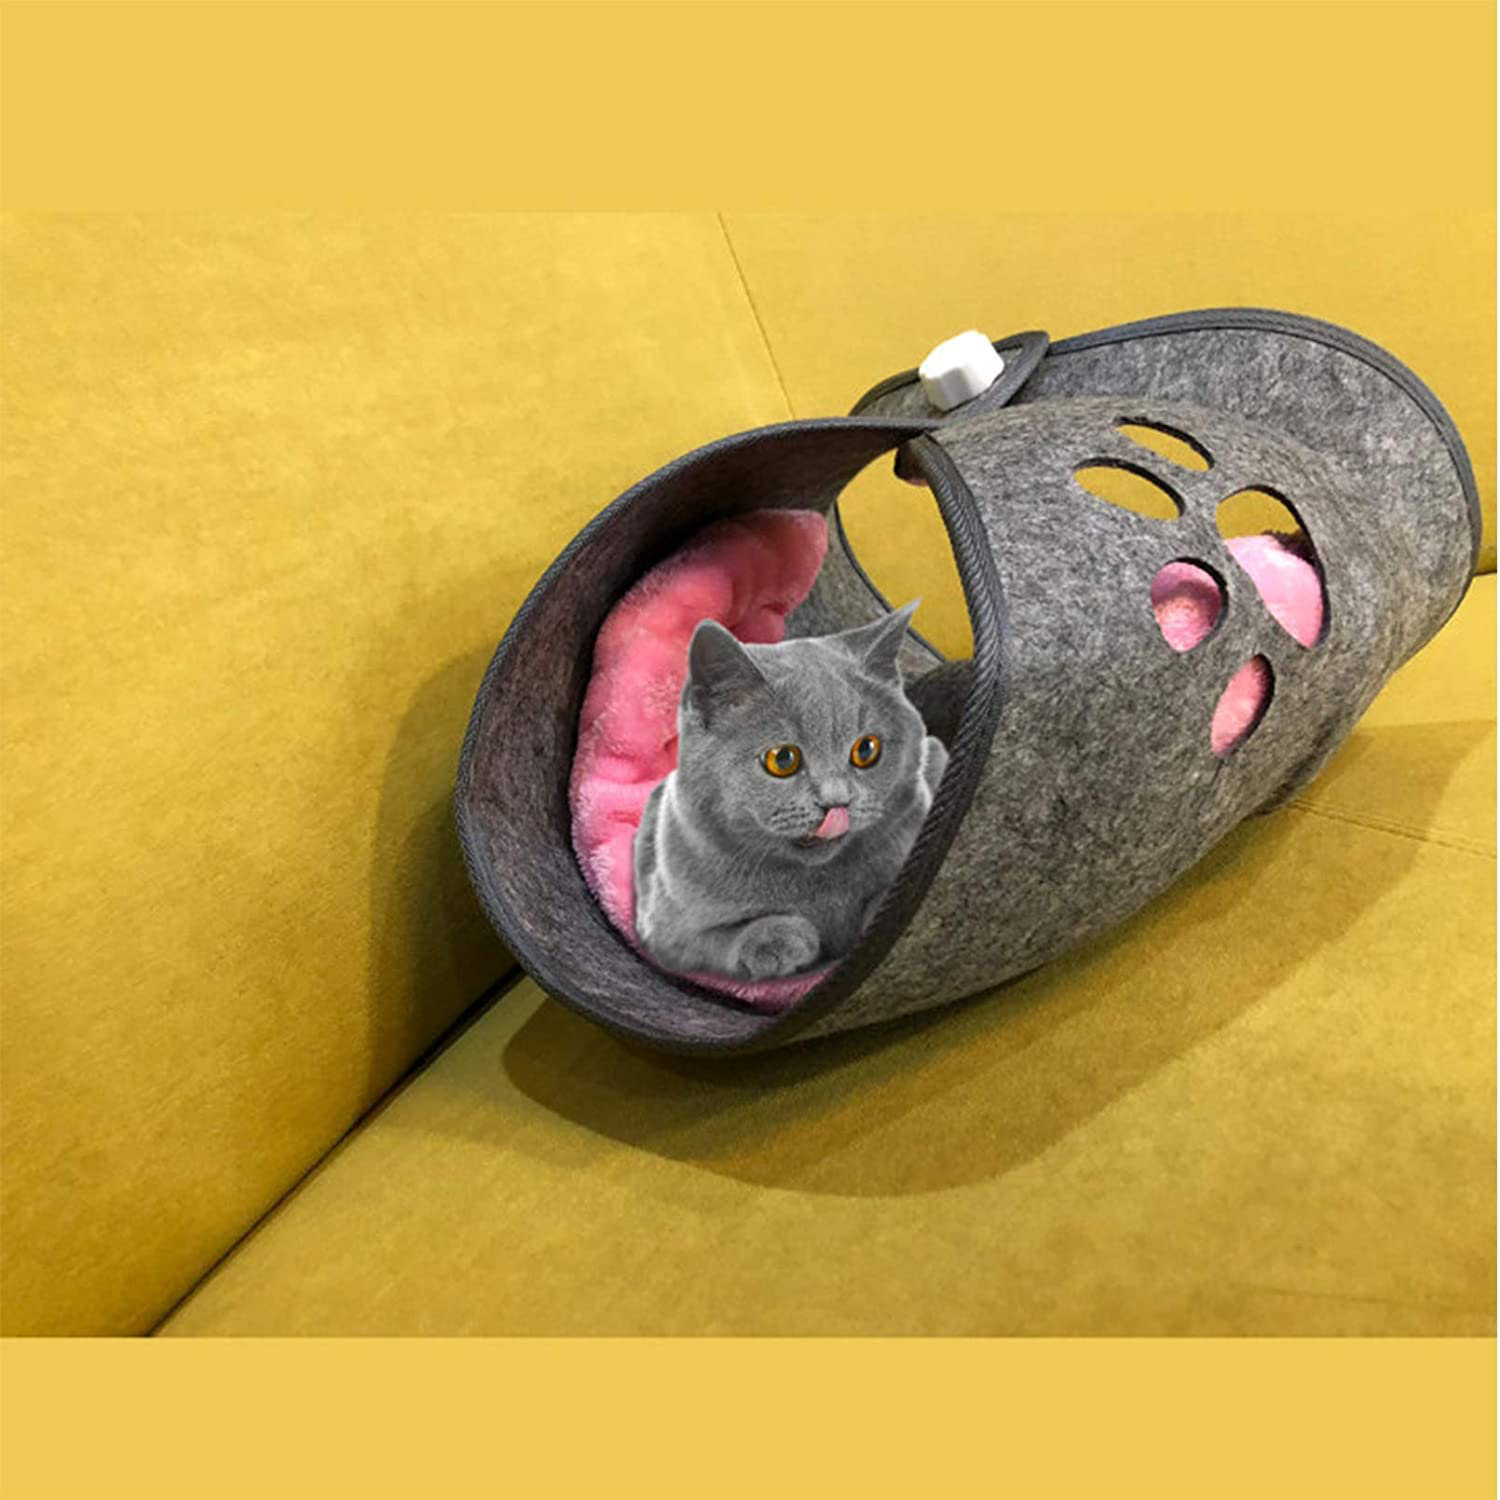 Cat Hammock Suction Type Hanging nest pet Bed can be Disassembled and Washed cat House Sun Table Hammock Summer cat nest All The Year Round